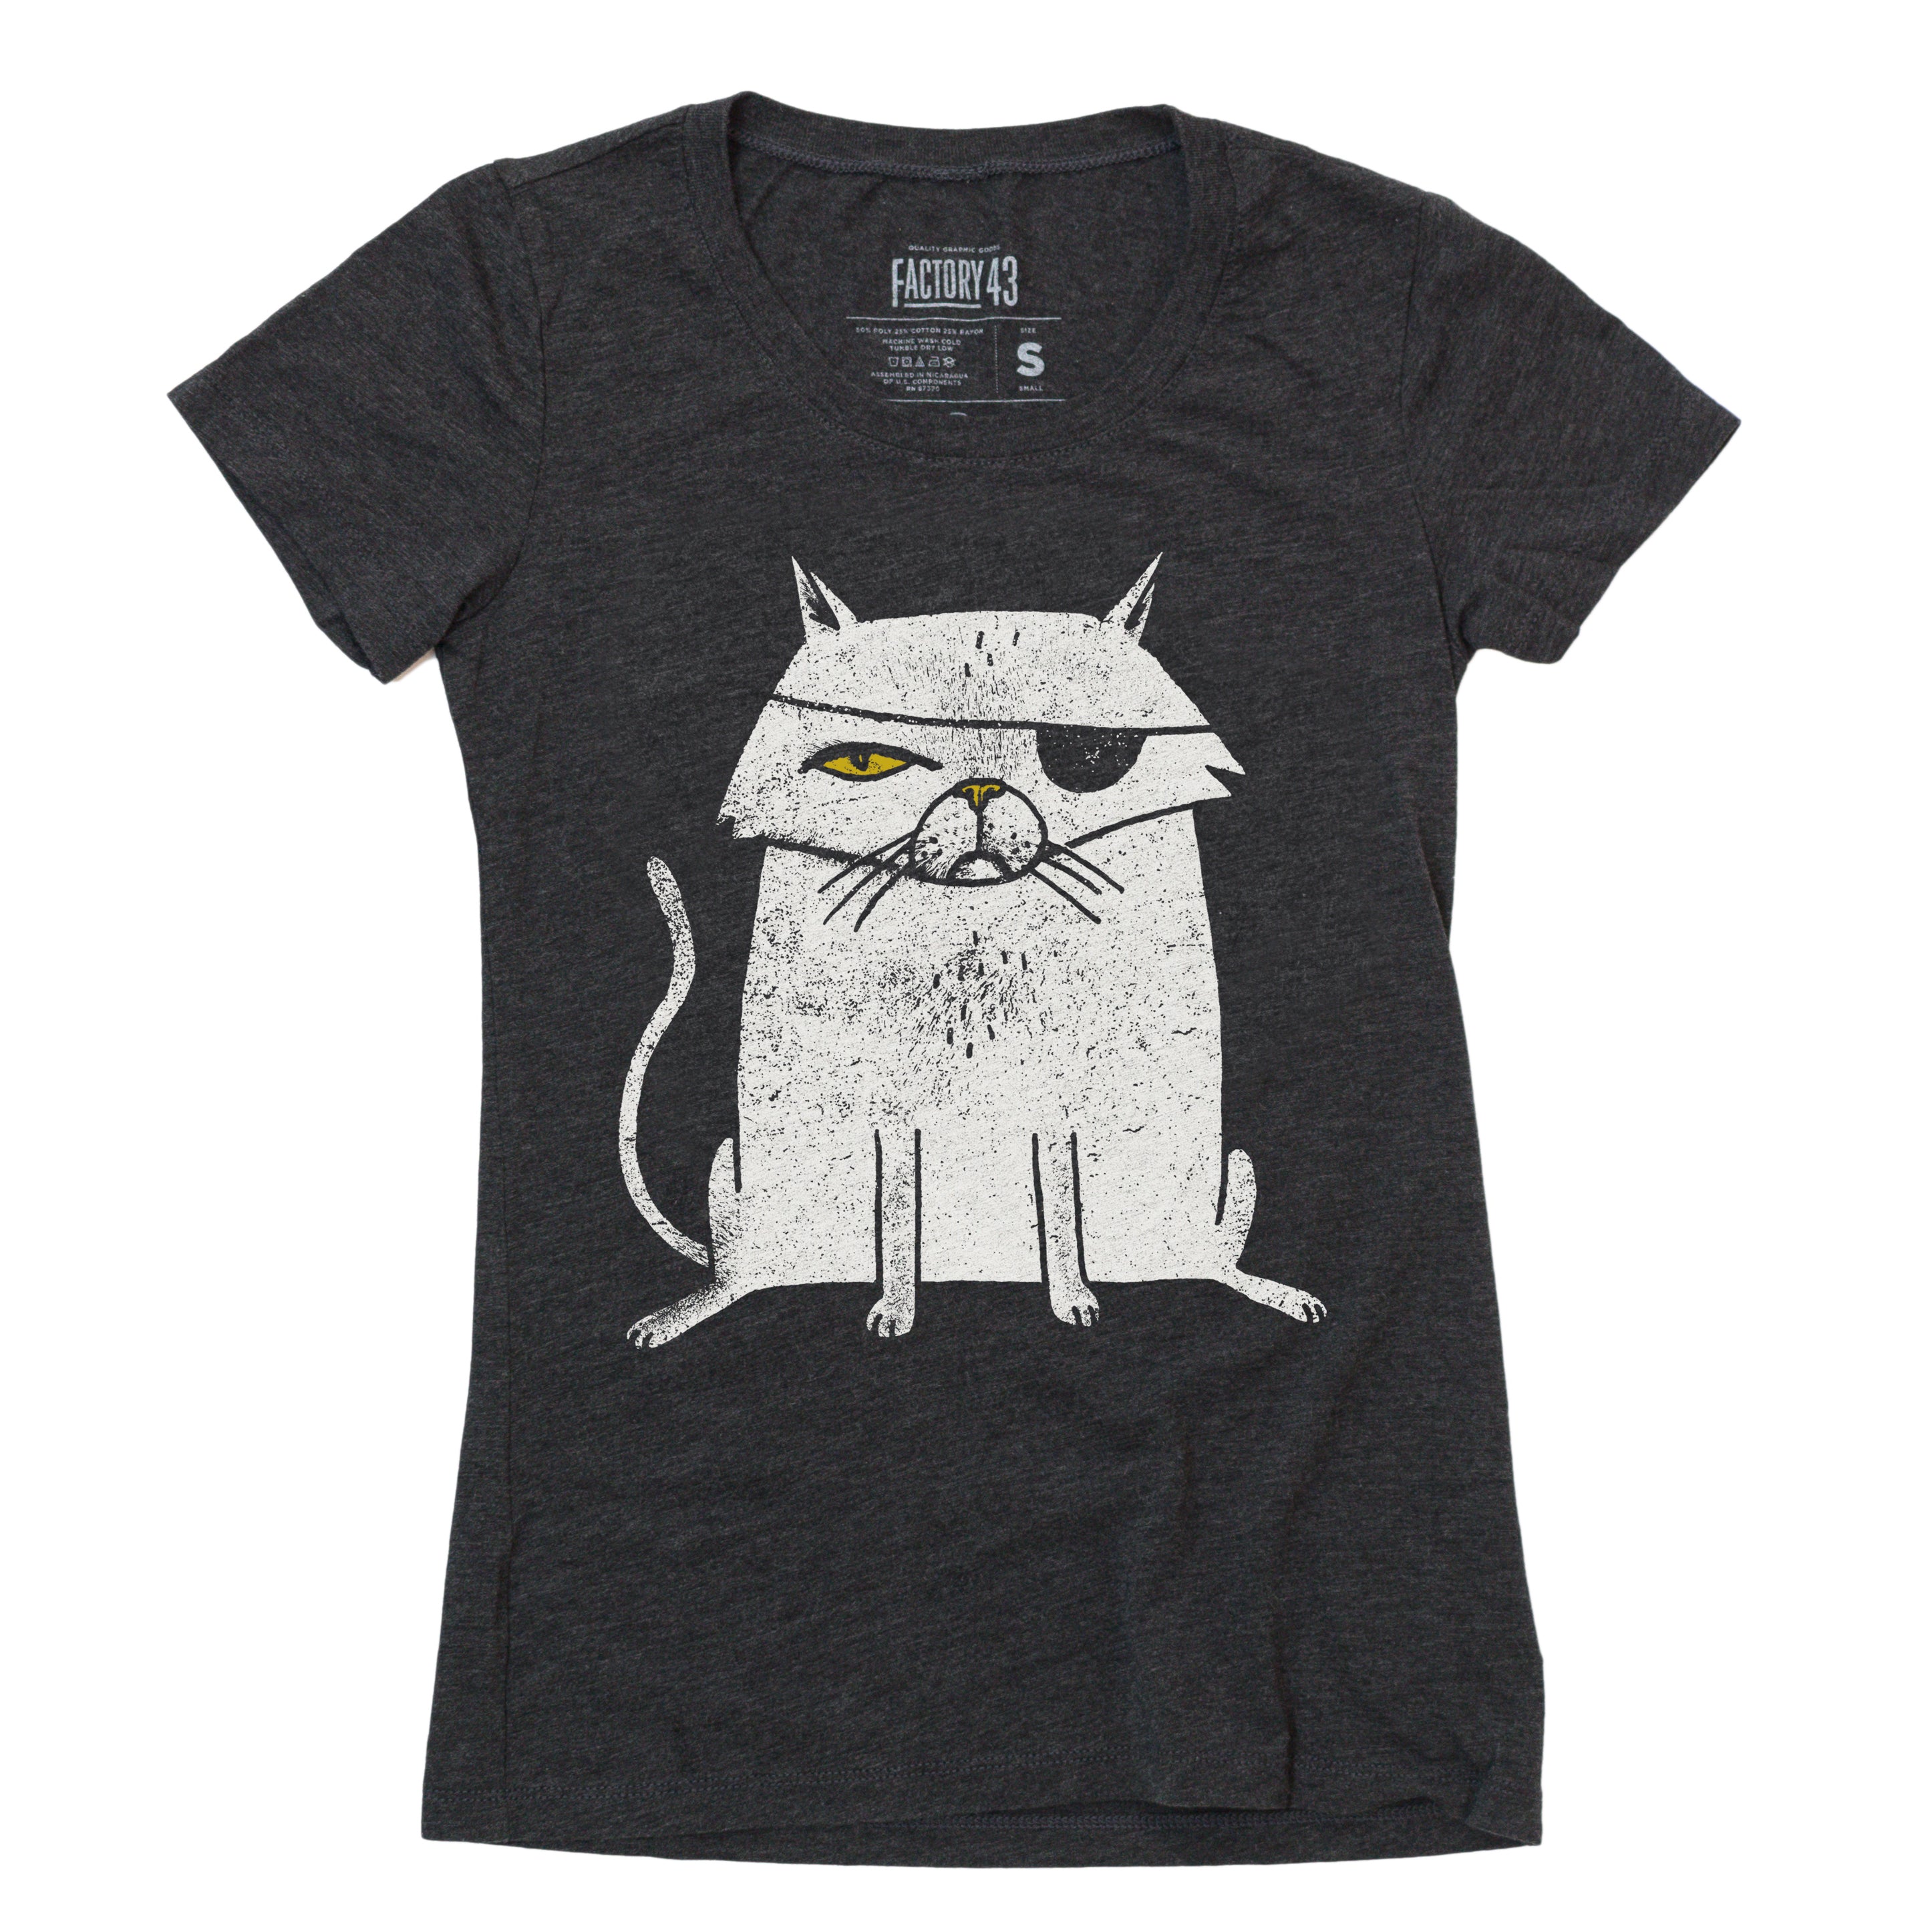 Slim style of super soft gray black womens tshirt of a one eyed cat with an eyepatch. The cat looks like a pirate or an evil Bond villian. Factory 43 is a graphic design studio that makes art with a PNW vibe that reflects their Midwest/Southern roots. This cotton/polyester/rayon shirt printed in Seattle, Washington. The cat is white with a yellow eye and nose. Please order a size or two up when ordering, as it is a form fitting tshirt.